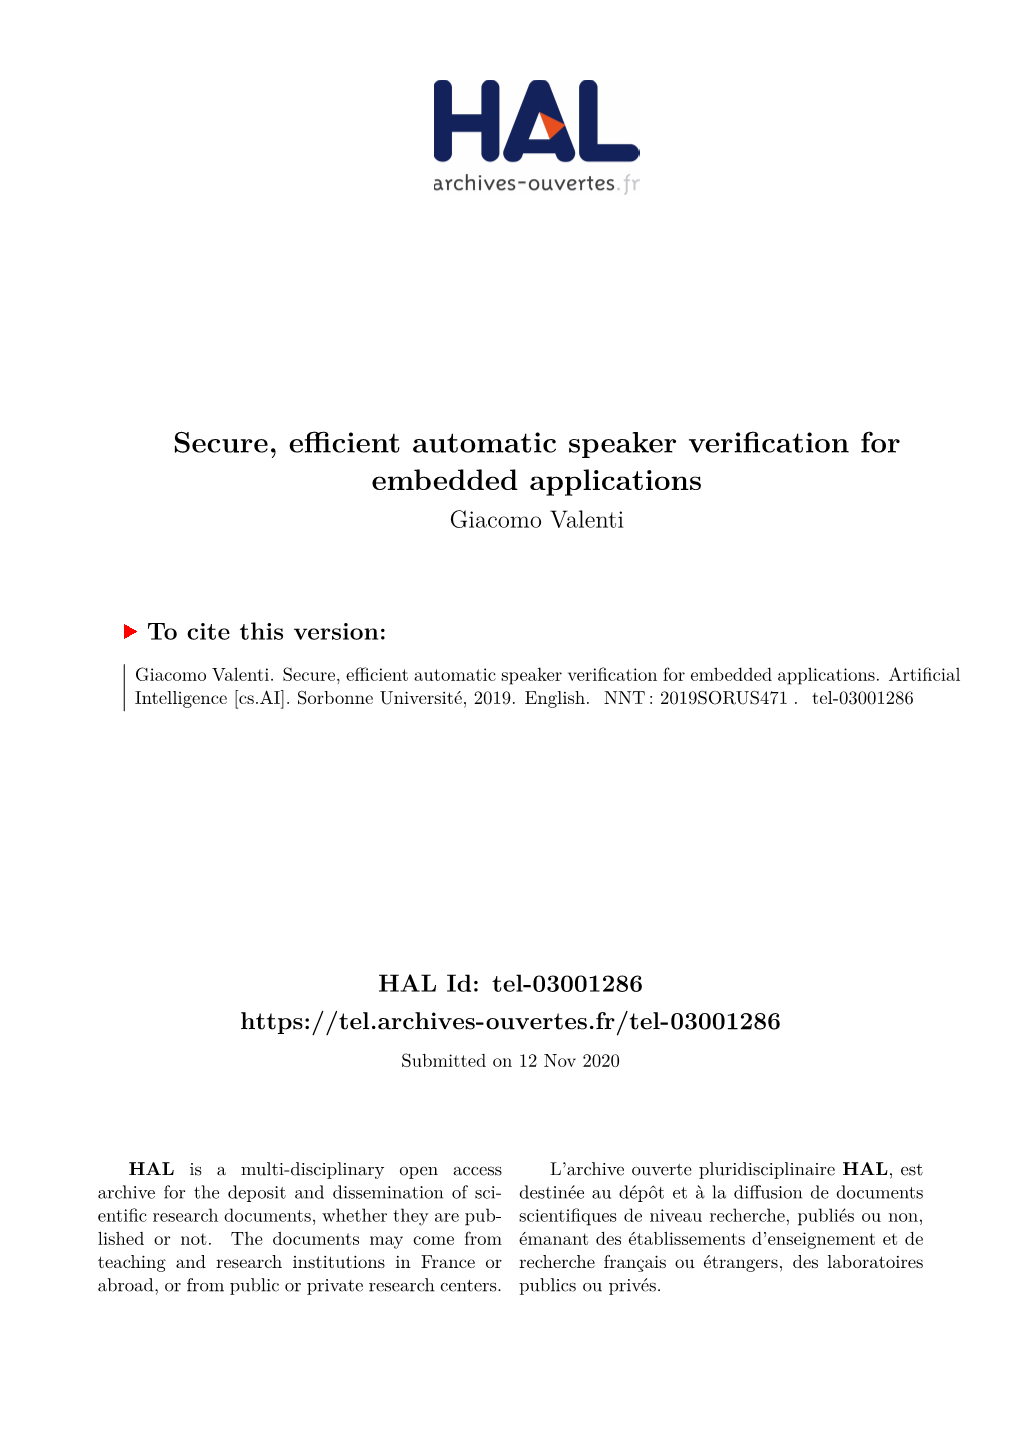 Secure, Efficient Automatic Speaker Verification for Embedded Applications